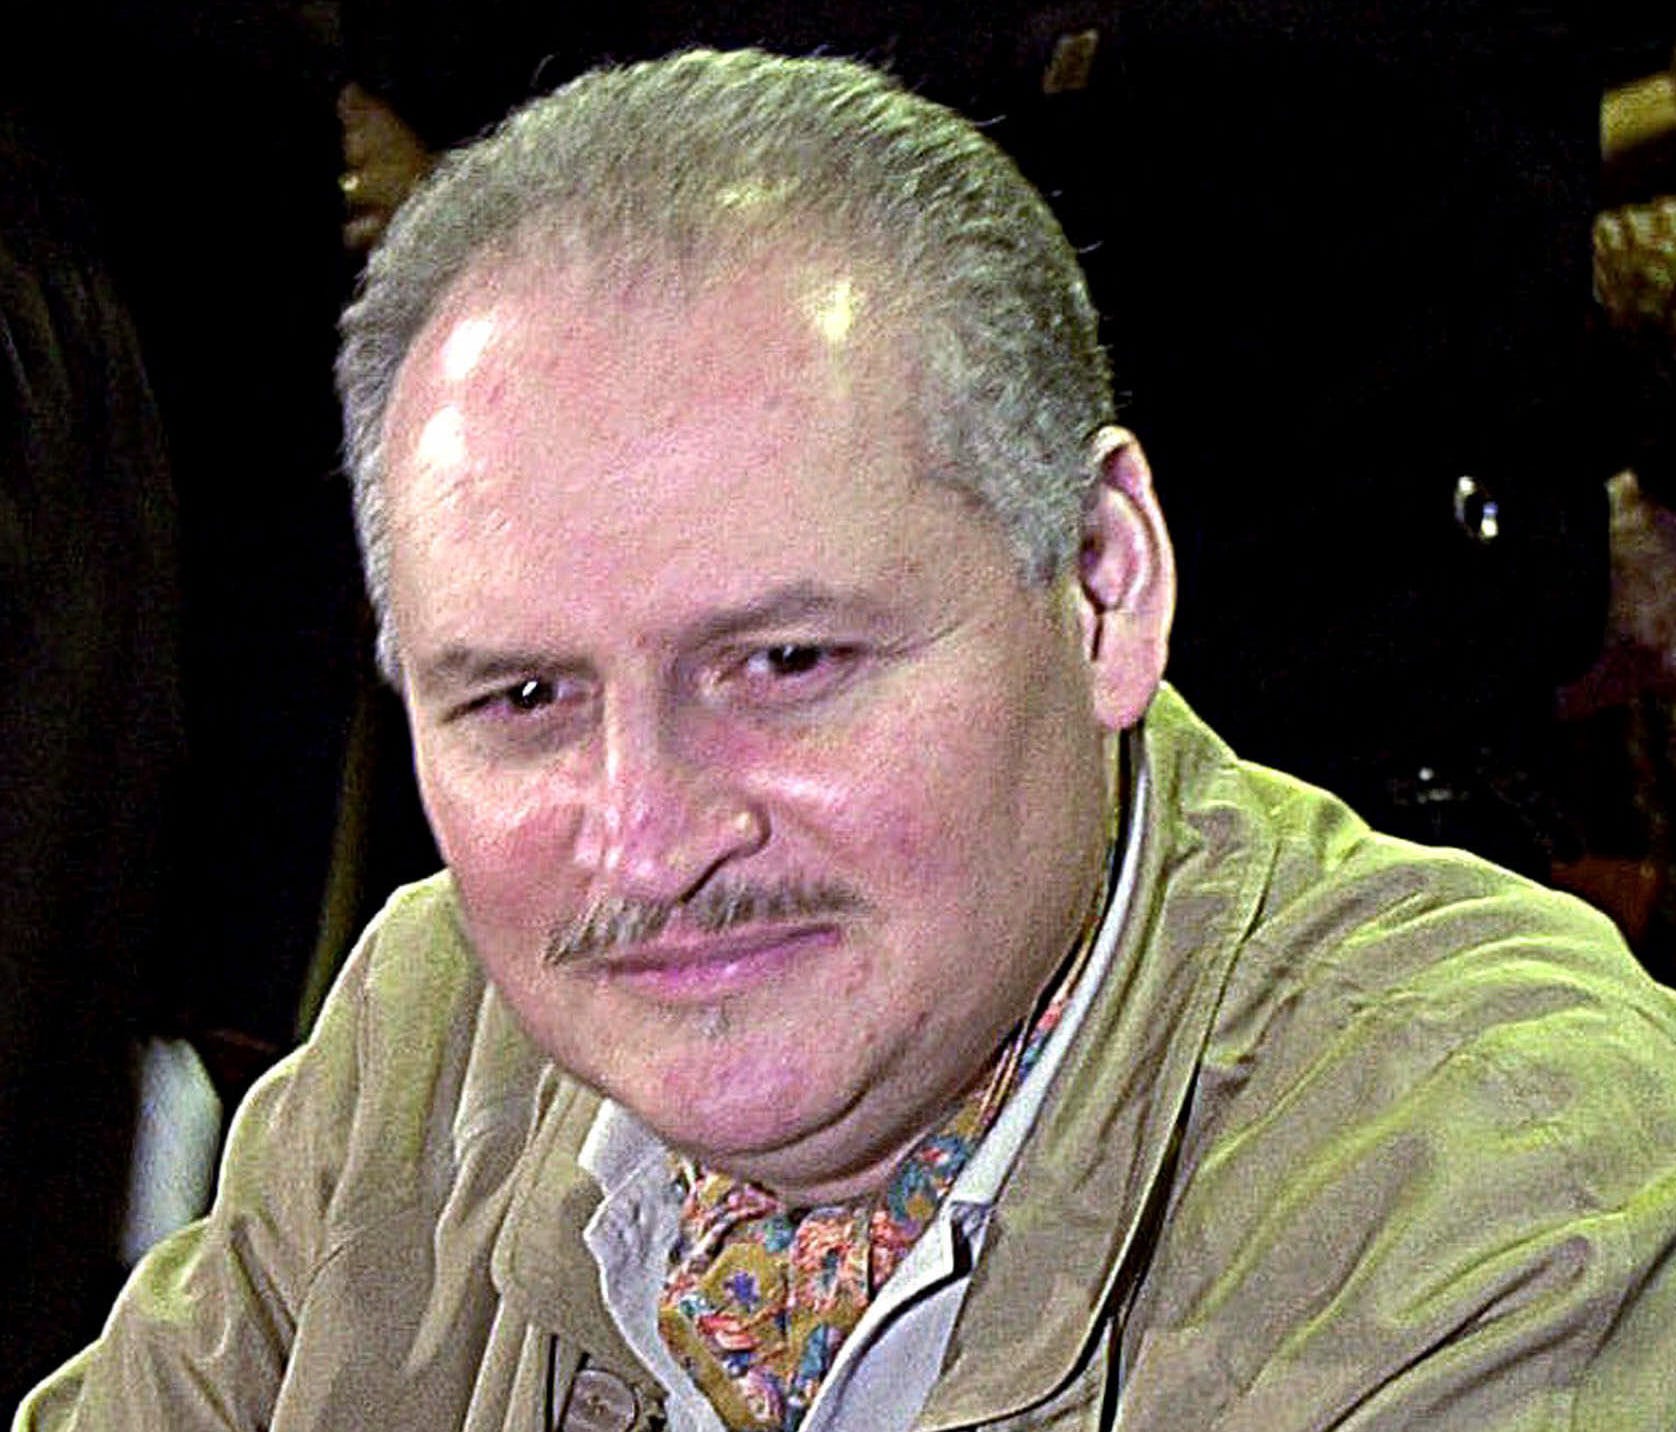 In this Tuesday, Nov. 28, 2000 file photo, Venezuelan international terrorist Carlos the Jackal whose real name is Ilich Ramirez Sanchez is seated in a Paris courtroom.